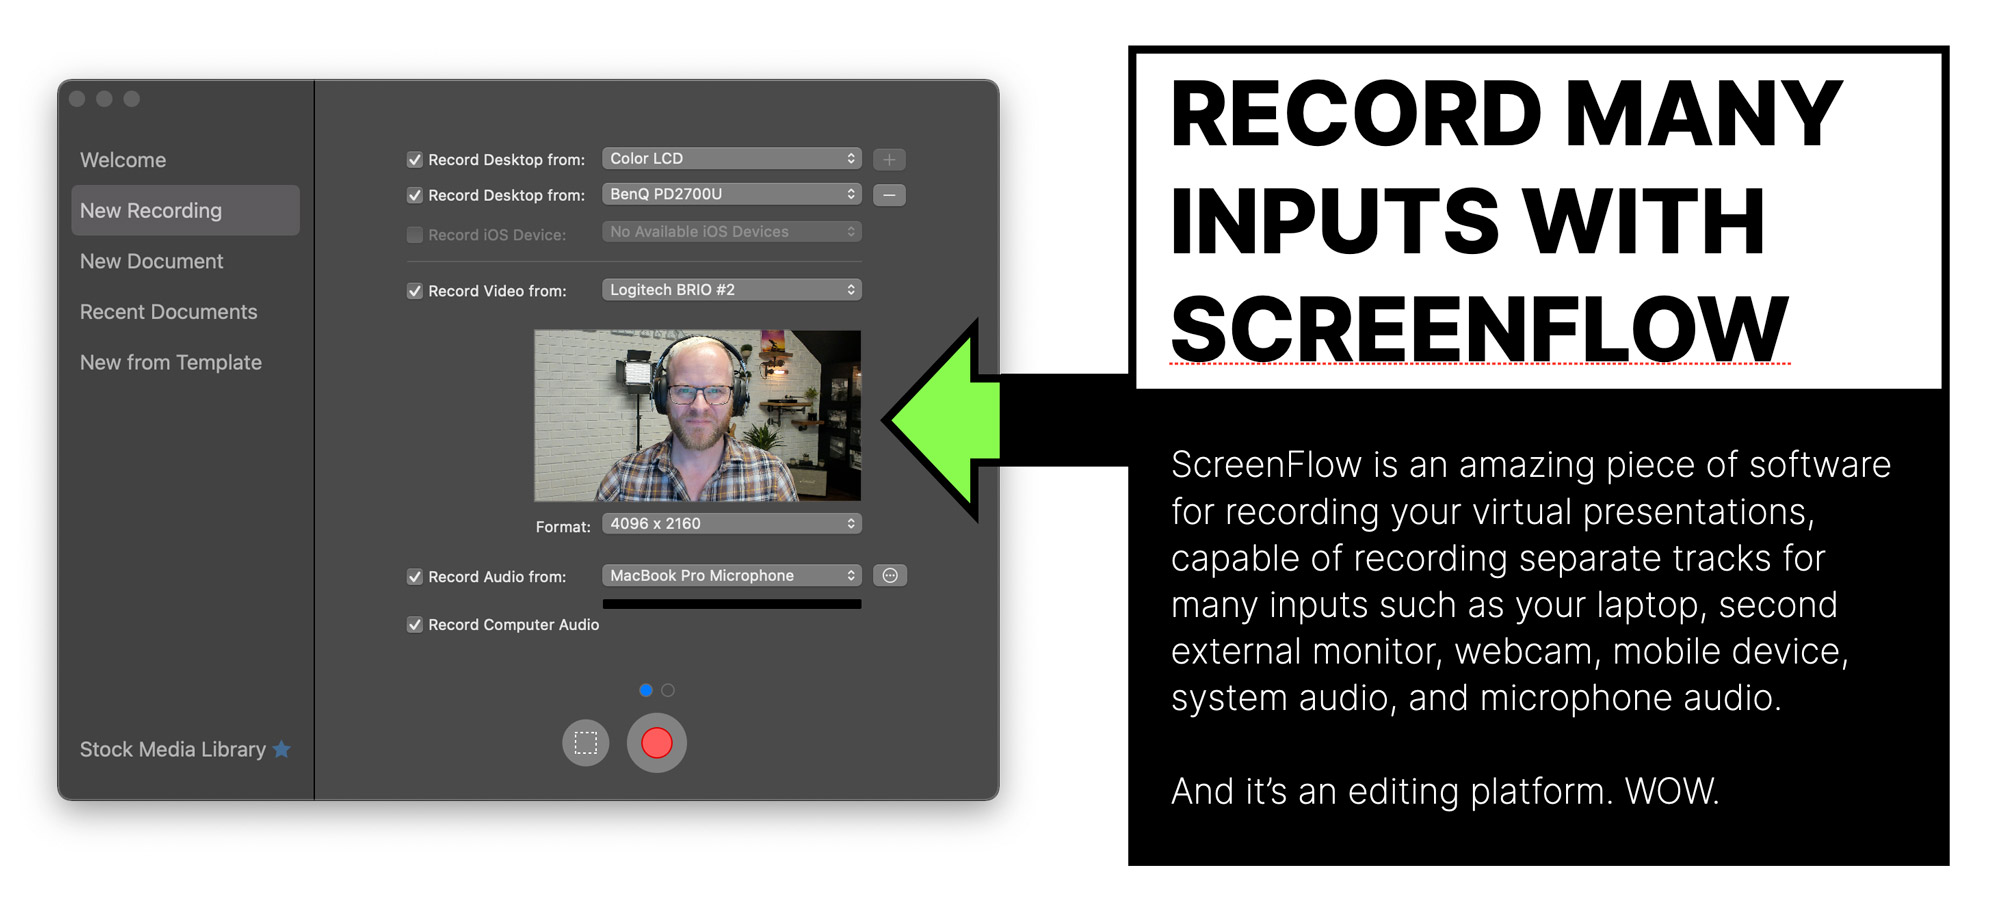 ScreenFlow lets you record many inputs such as multiple screens, webcam, system audio and microphone